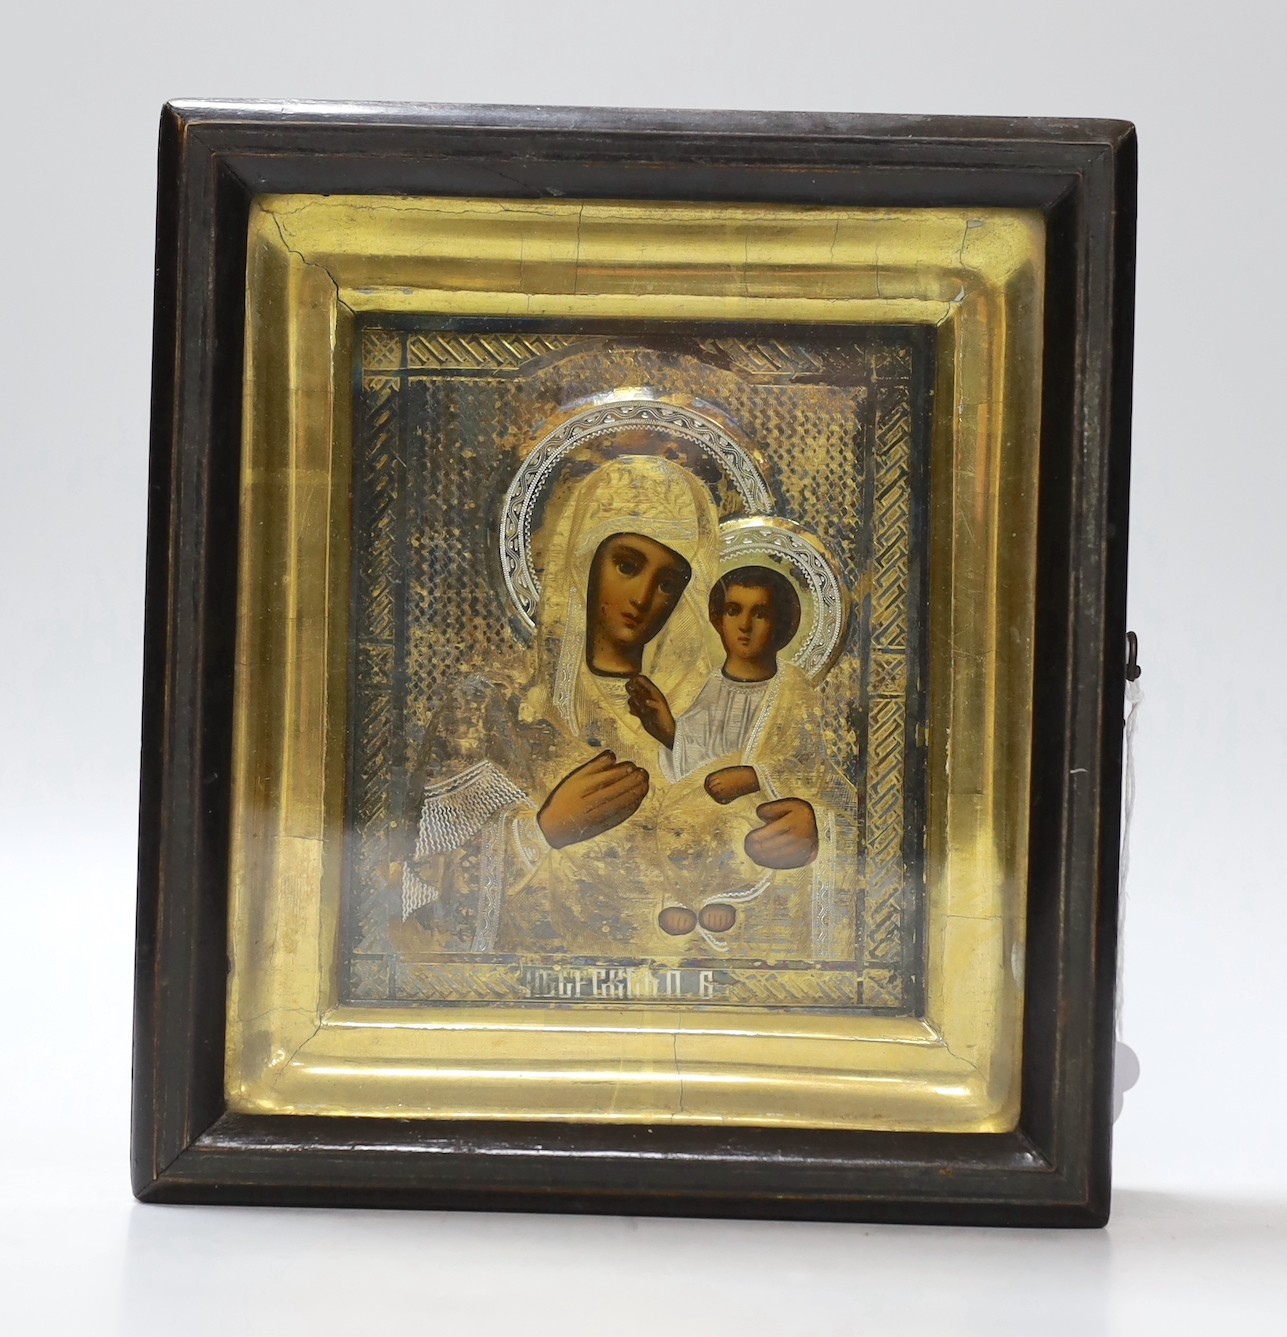 A 20th century Russian painted wood icon of Madonna and Child, with silver-gilt oklad, in gilt frame, 19.5 x 17.5cm